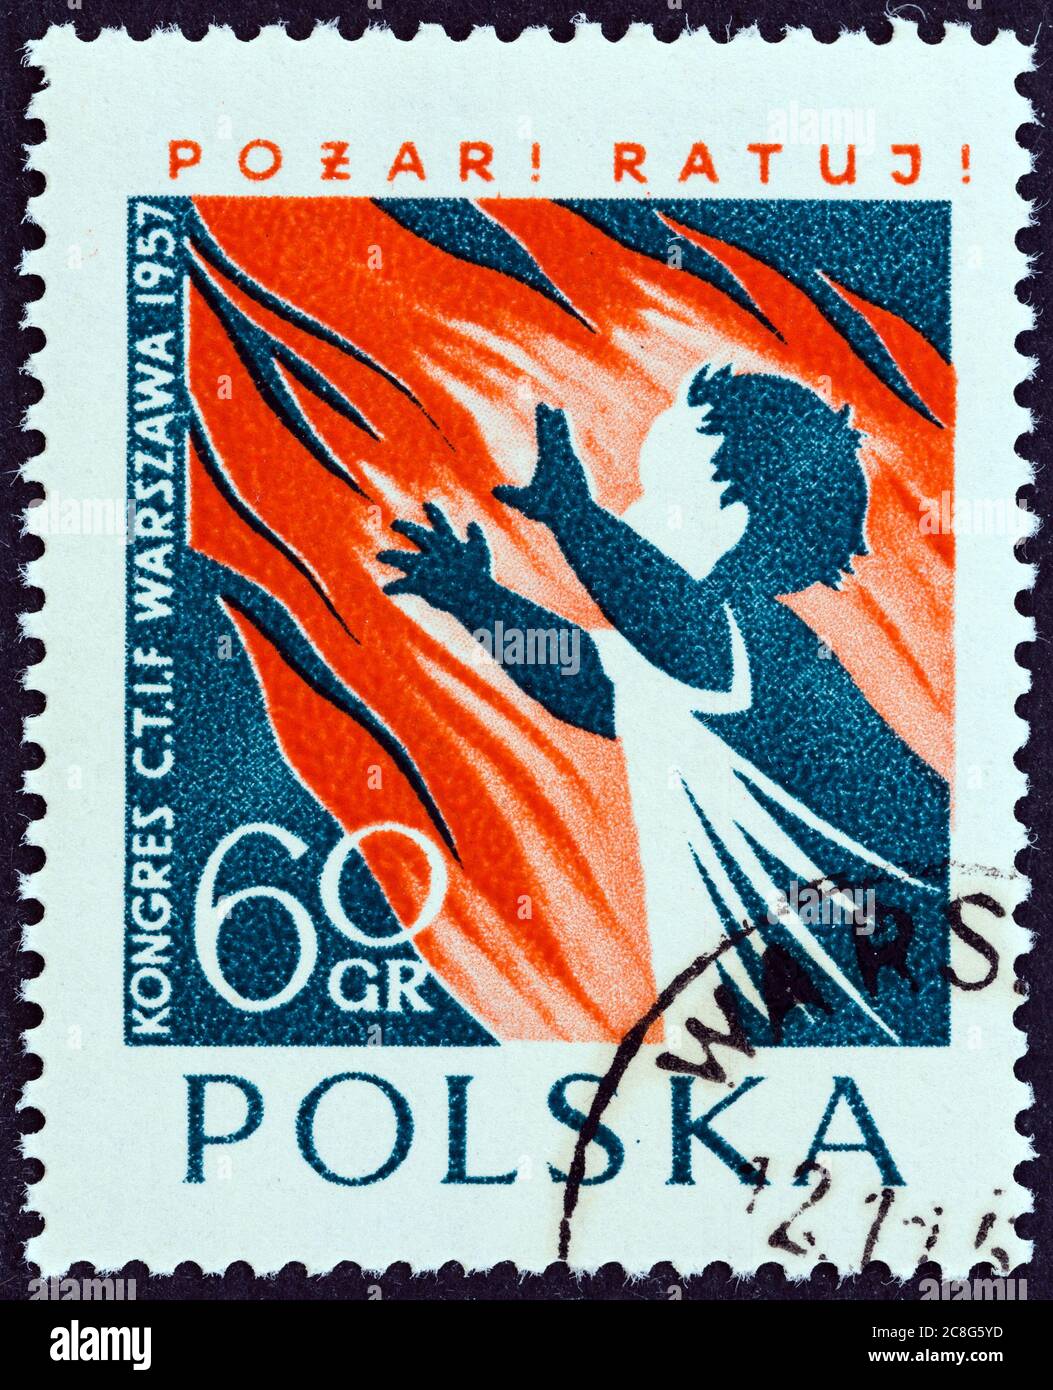 POLAND - CIRCA 1957: A stamp printed in Poland issued for the International Fire Brigades Conference, Warsaw shows flames enveloping child, circa 1957. Stock Photo